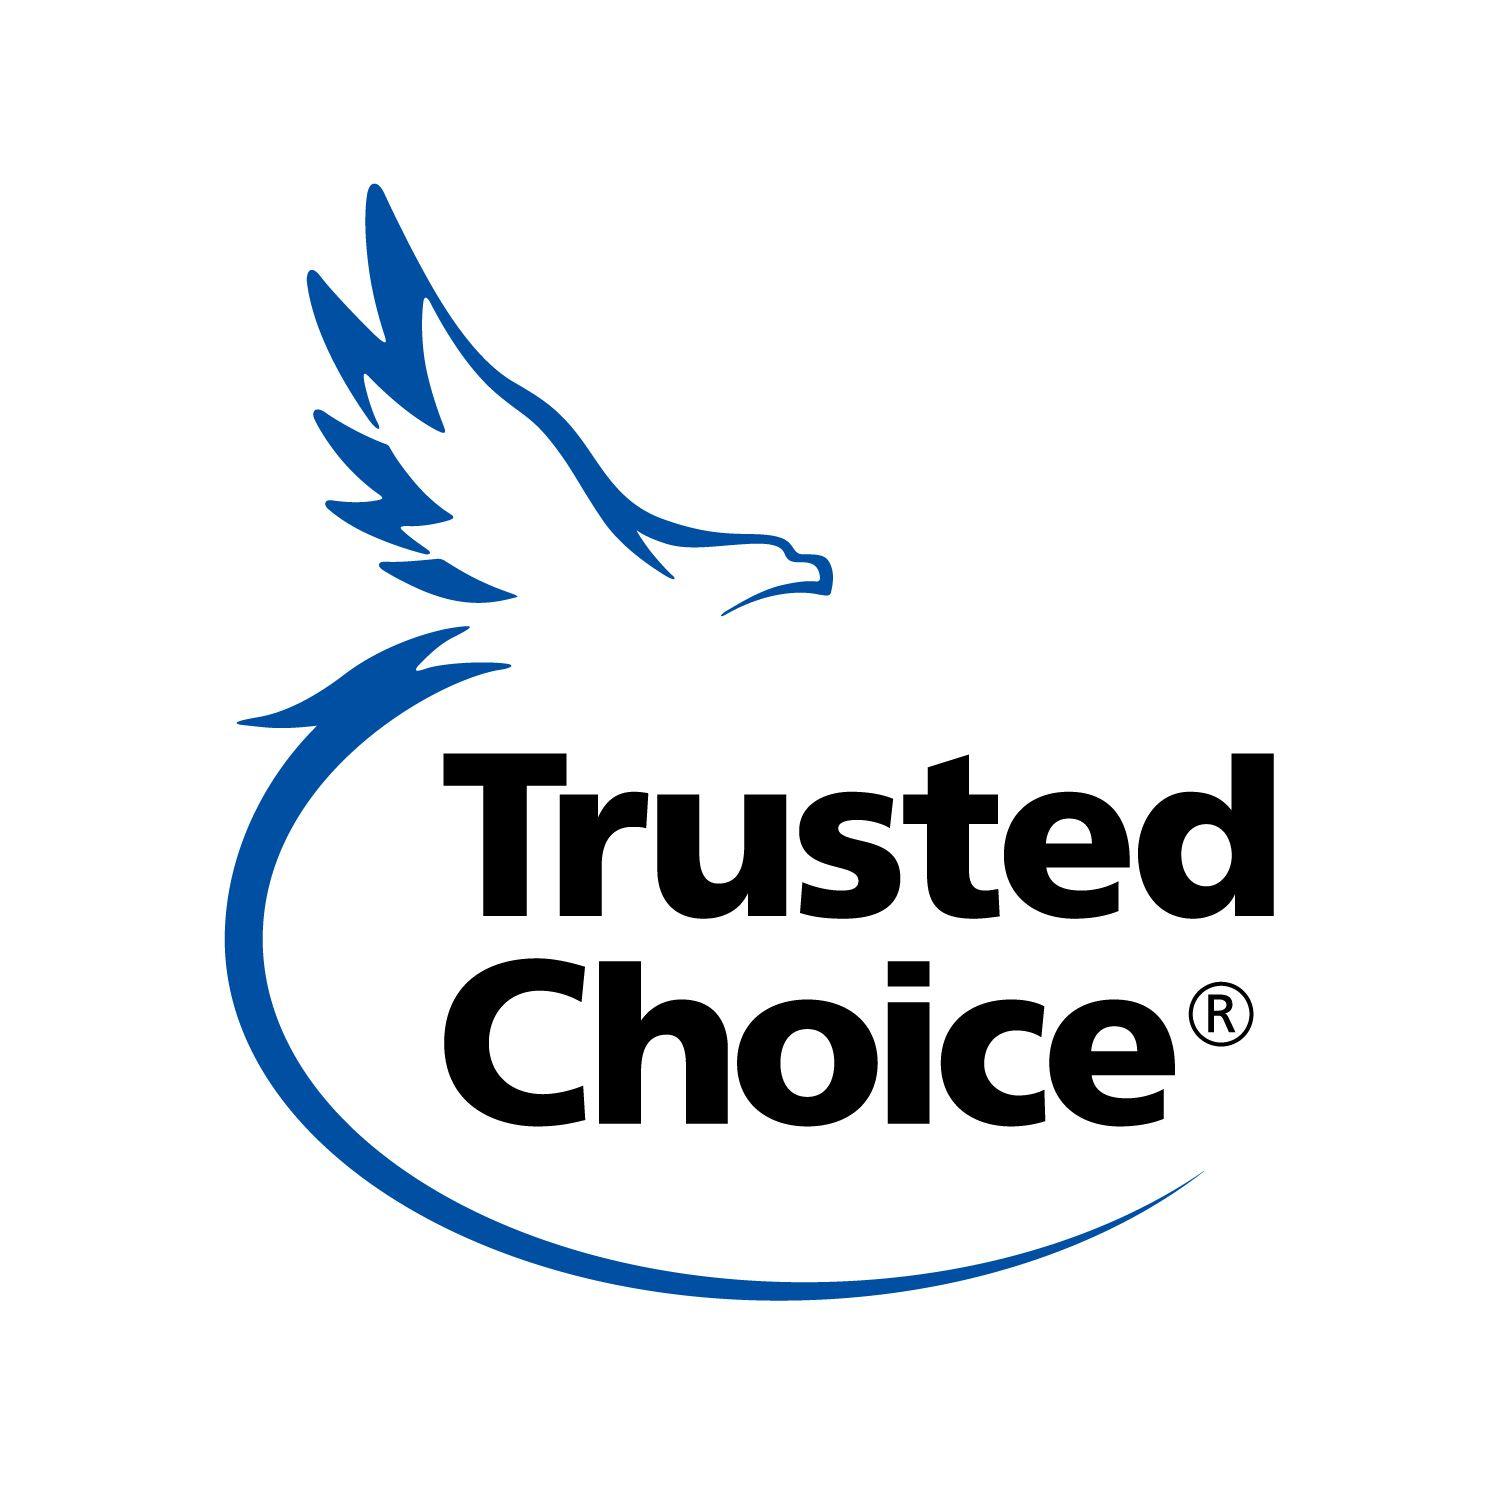 Choice Logo - Products & Tools Trusted Choice Logos